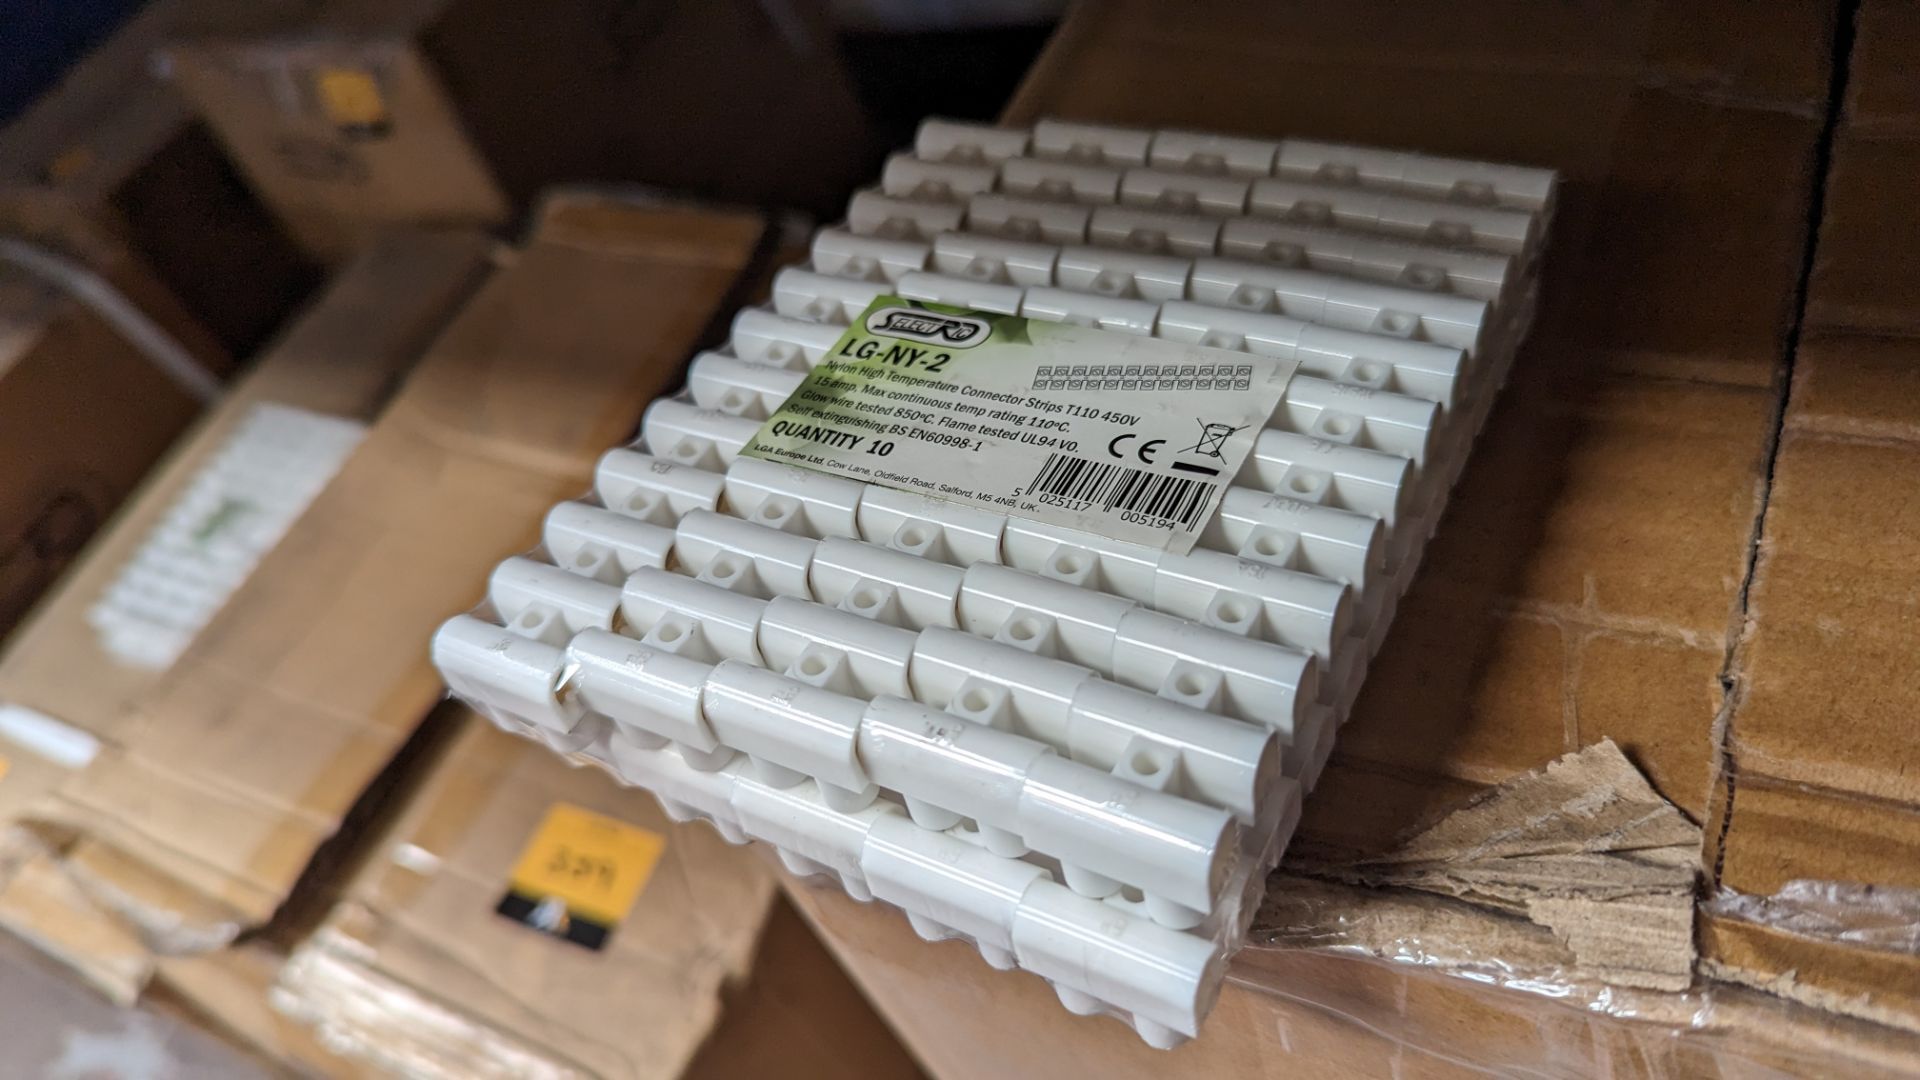 3 boxes (1,500 pieces total) of Selectric LG-NY-2 nylon high temperature connector strips, 15 amp - Image 3 of 4